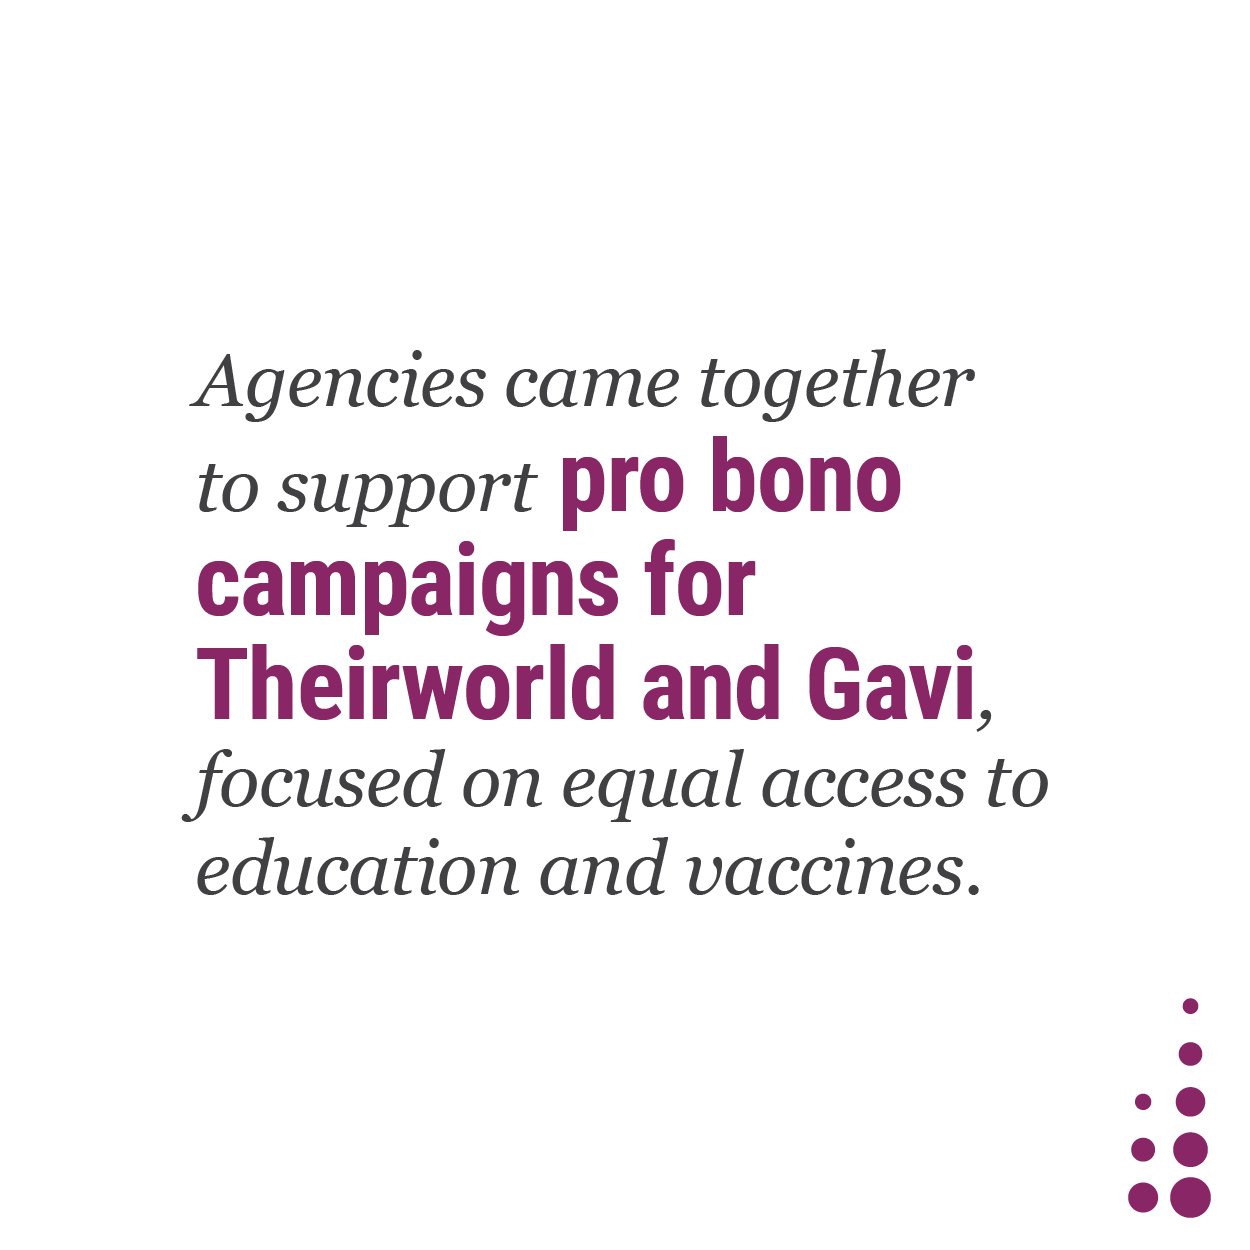 Agencies came together to support pro bono campaigns for Theirworld and Gavi, focused on equal access to education and vaccines.